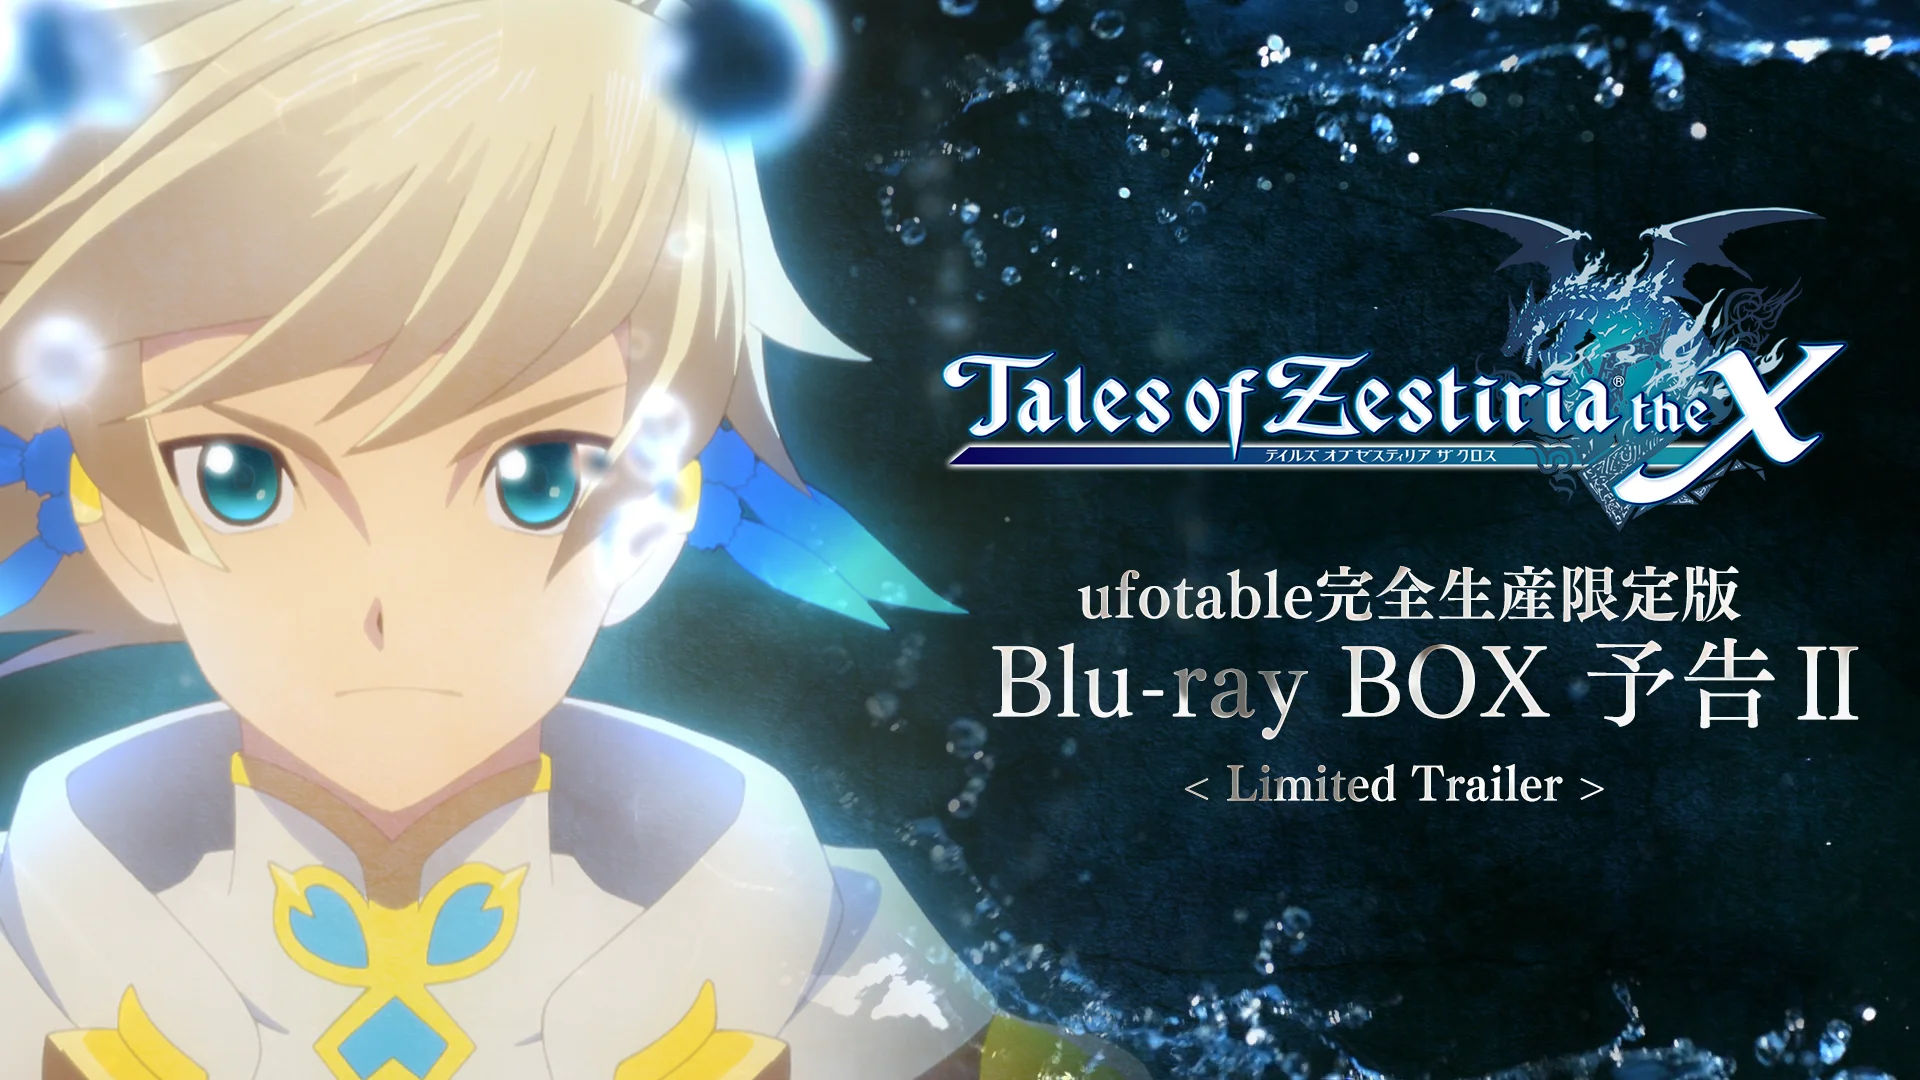 Tales of Zestiria's Second Trailer Highlights All The New